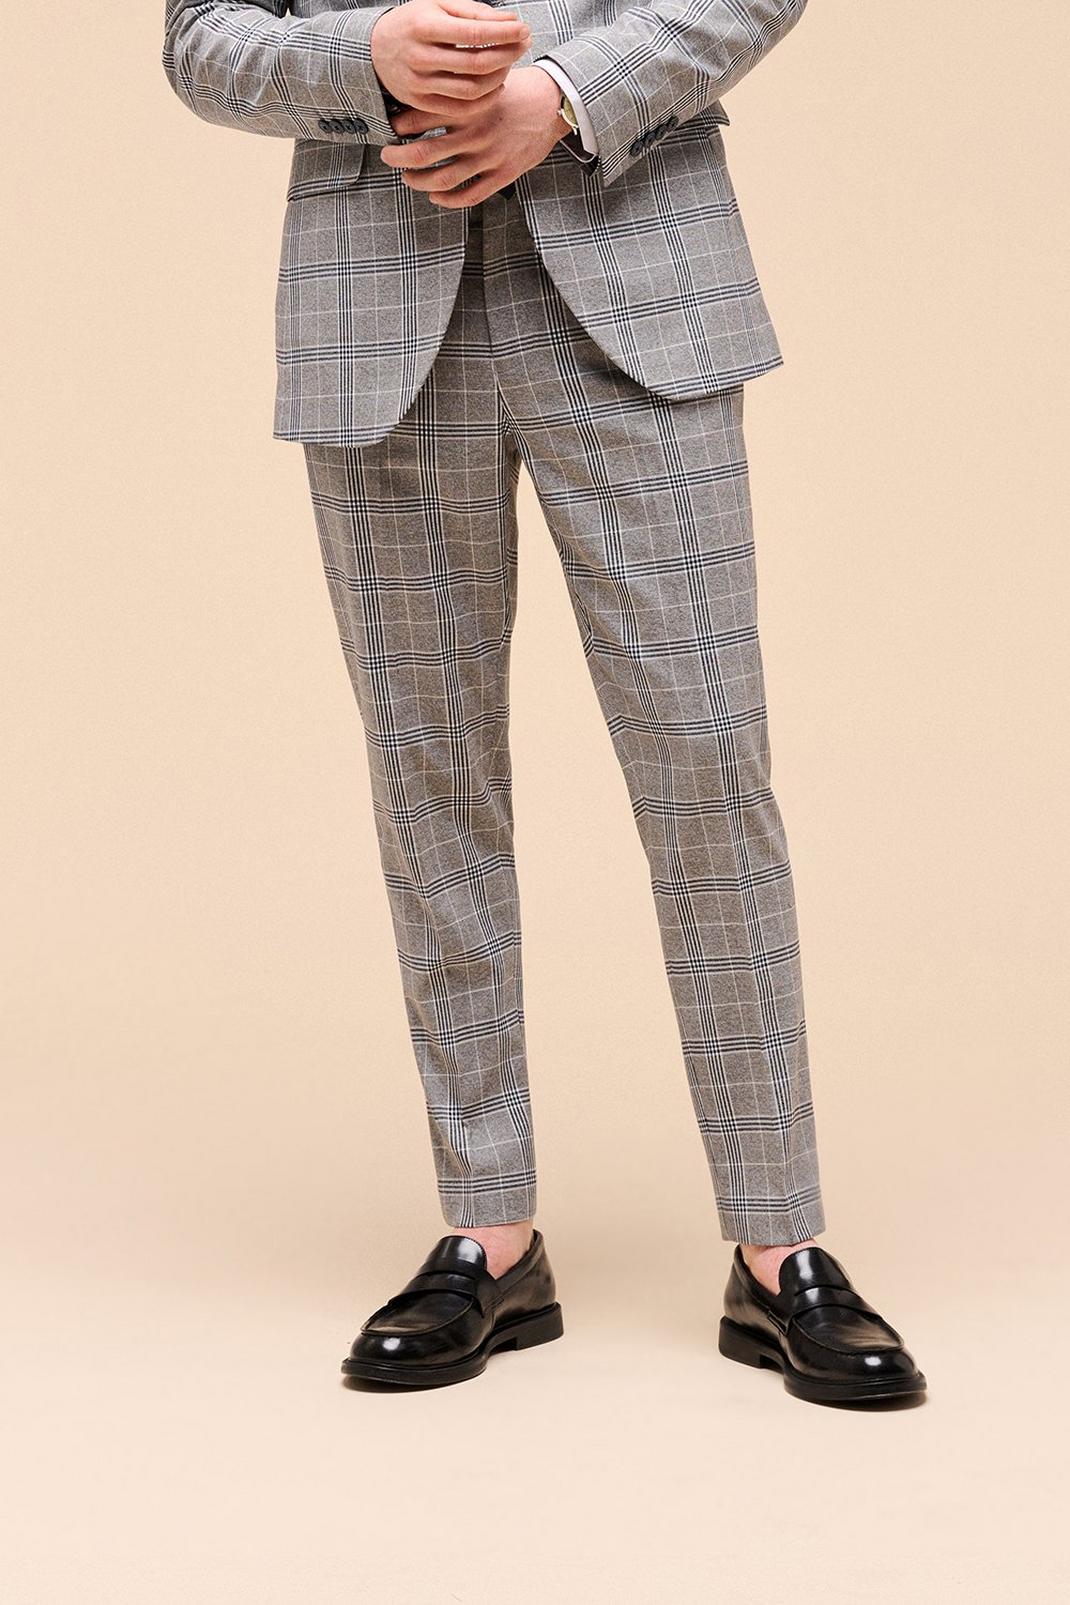 131 Skinny Fit Grey Check Trousers image number 1